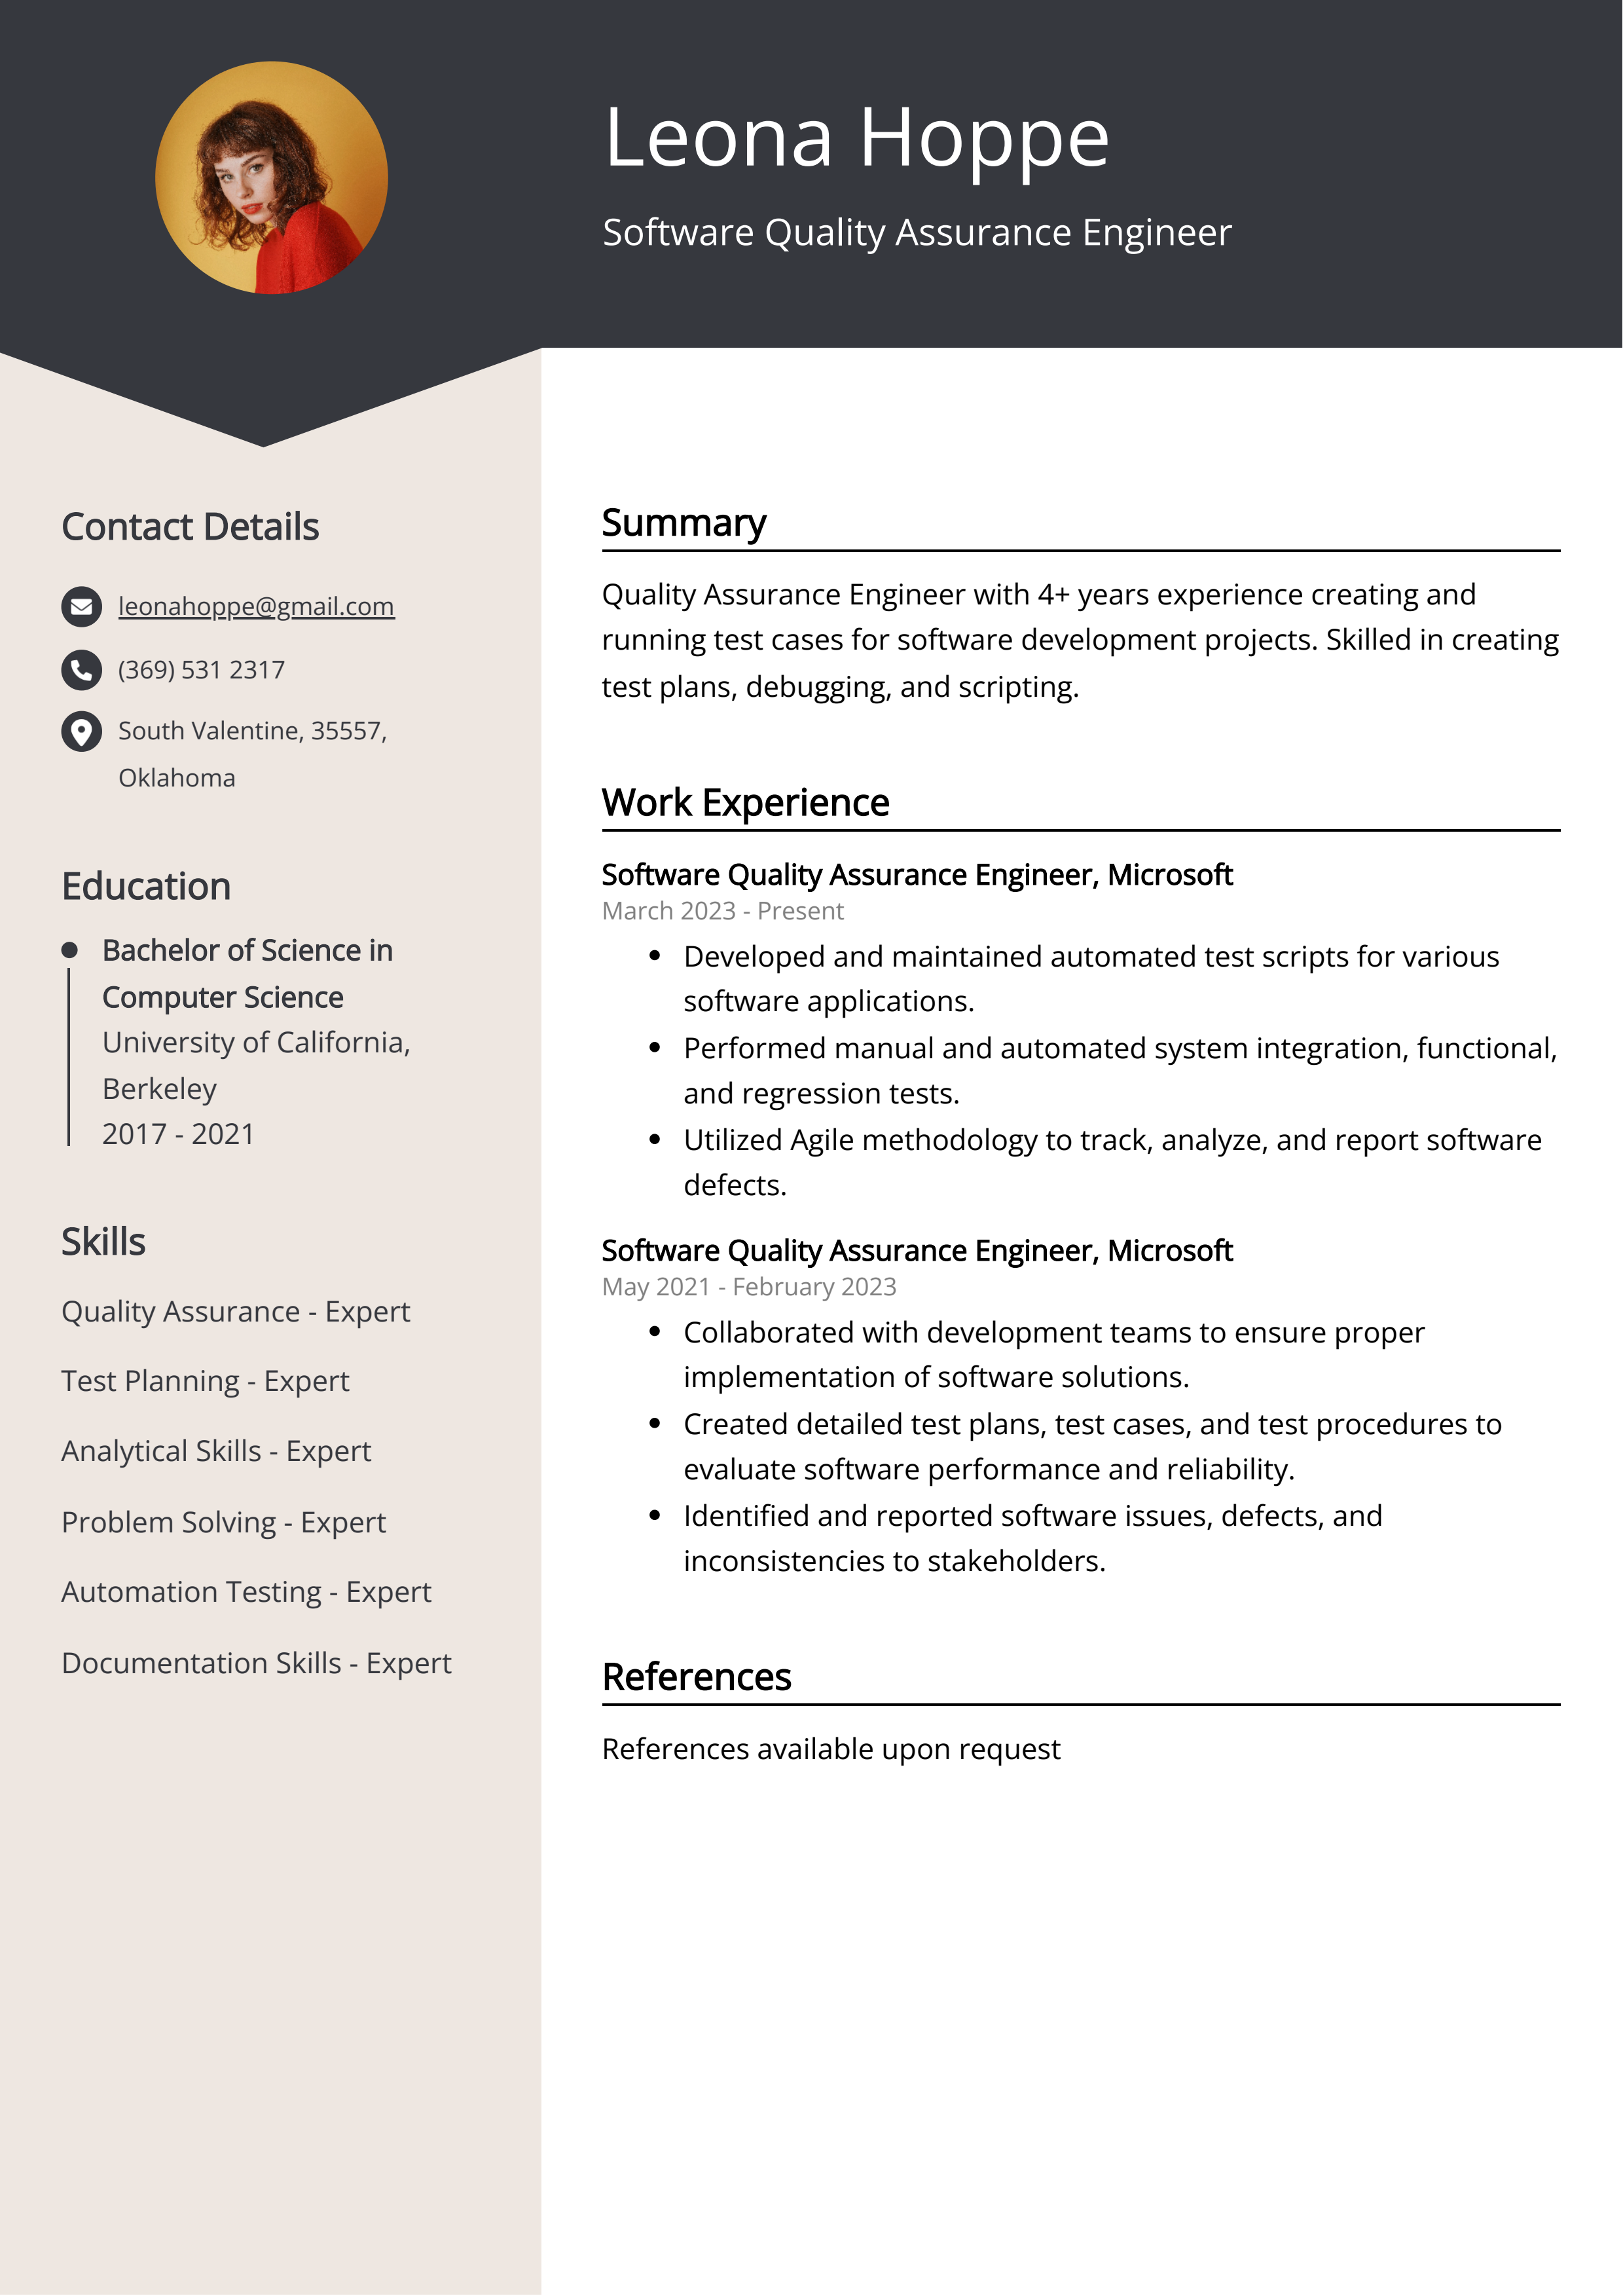 Software Quality Assurance Engineer CV Example